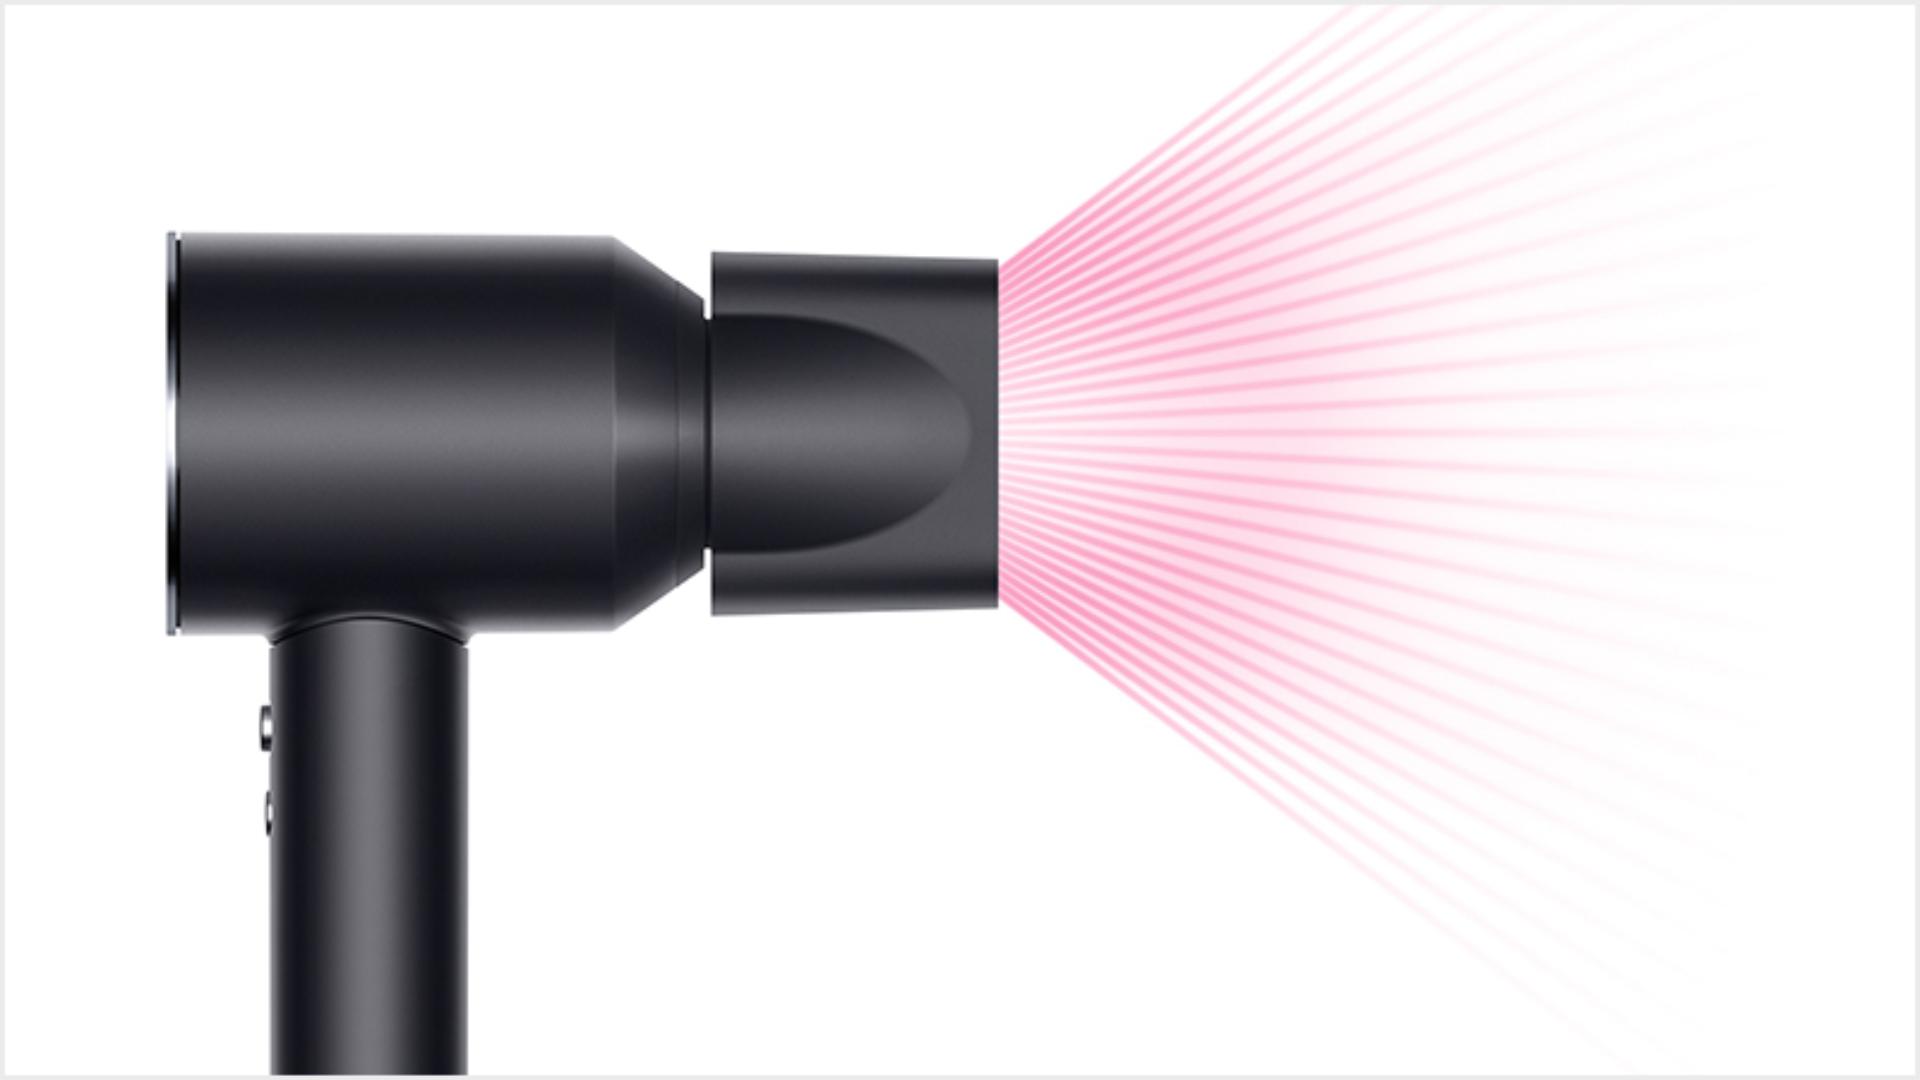 Dyson Supersonic™ hair dryer Black/Nickel with smoothing nozzle attached